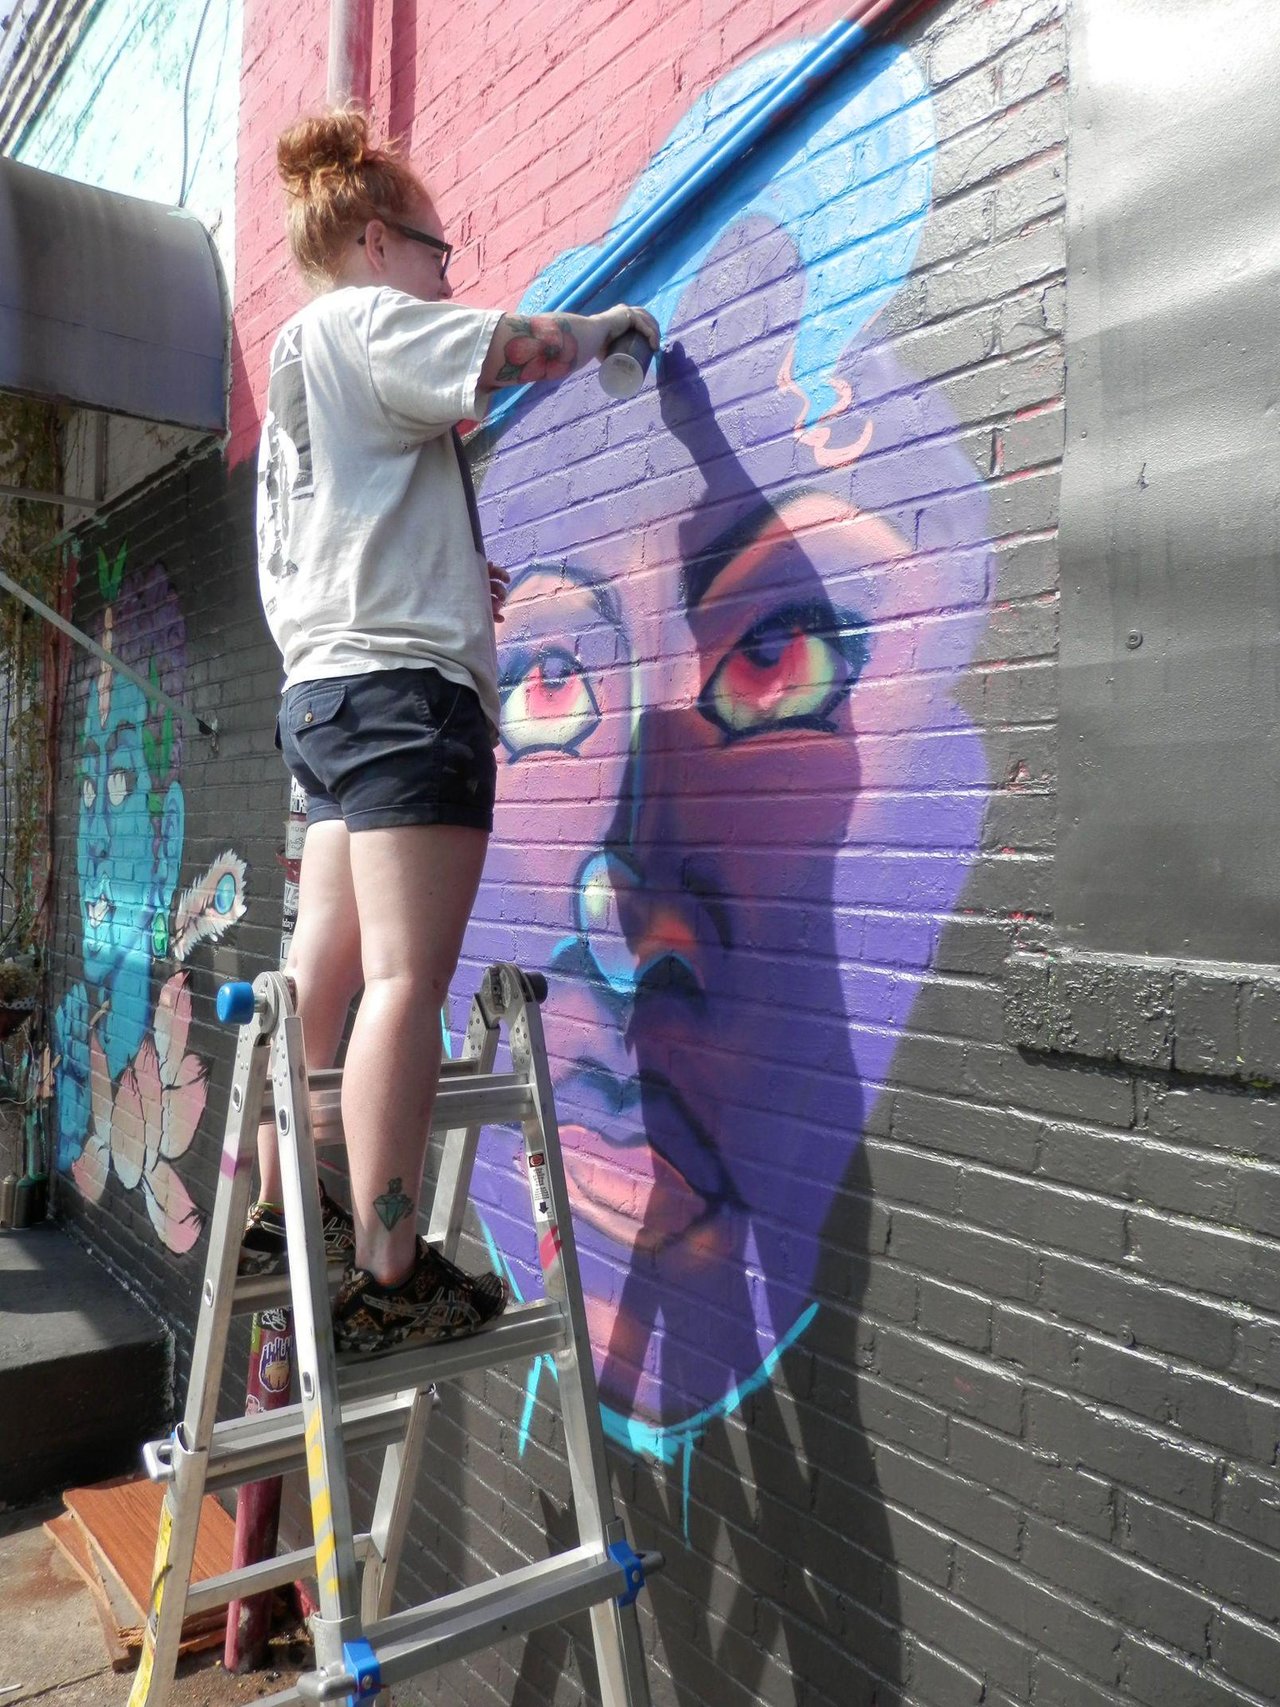 #Houston #Graffiti #Streetart Clear (Houston) working on her art at Super Happy Funland for Meeting of Styles 2015. http://t.co/T5Y47Jcs6T